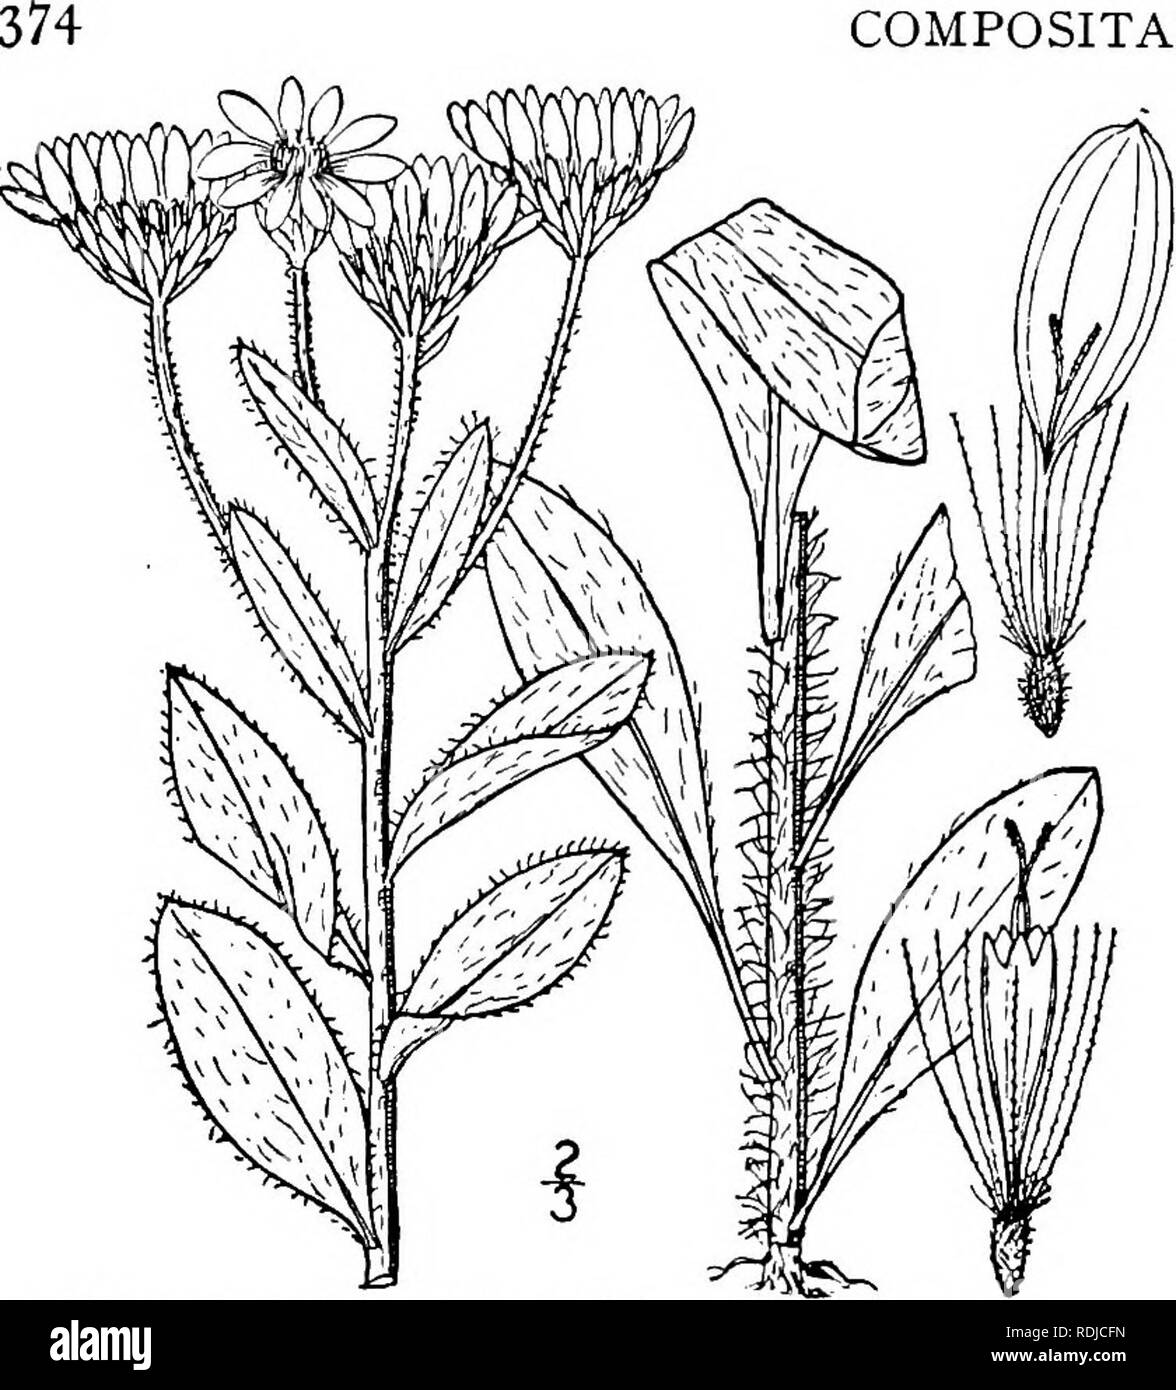 . An illustrated flora of the northern United States, Canada and the British possessions, from Newfoundland to the parallel of the southern boundary of Virginia, and from the Atlantic Ocean westward to the 102d meridian. Botany; Botany. COMPOSITAE.. 5. Chrysopsis villosa (Pursh) Nutt. Hairy Golden Aster. Fig. 4199. Amelias villosus Pursh, Fl. Am. Sept. 564. 1814. Inula villosa Nutt. Gen. 2: 151. 1818. C. villosa Nutt. Trans. Am. Phil. Soc. II. 7: 316. 1841. C. foliosa Nutt. loc. cit. 316. 1841. Chrysopsis camporum Greene, Pittonia 3: 88. 1897. Stem villous or strigose-pubescent, i°-2° high. Le Stock Photo